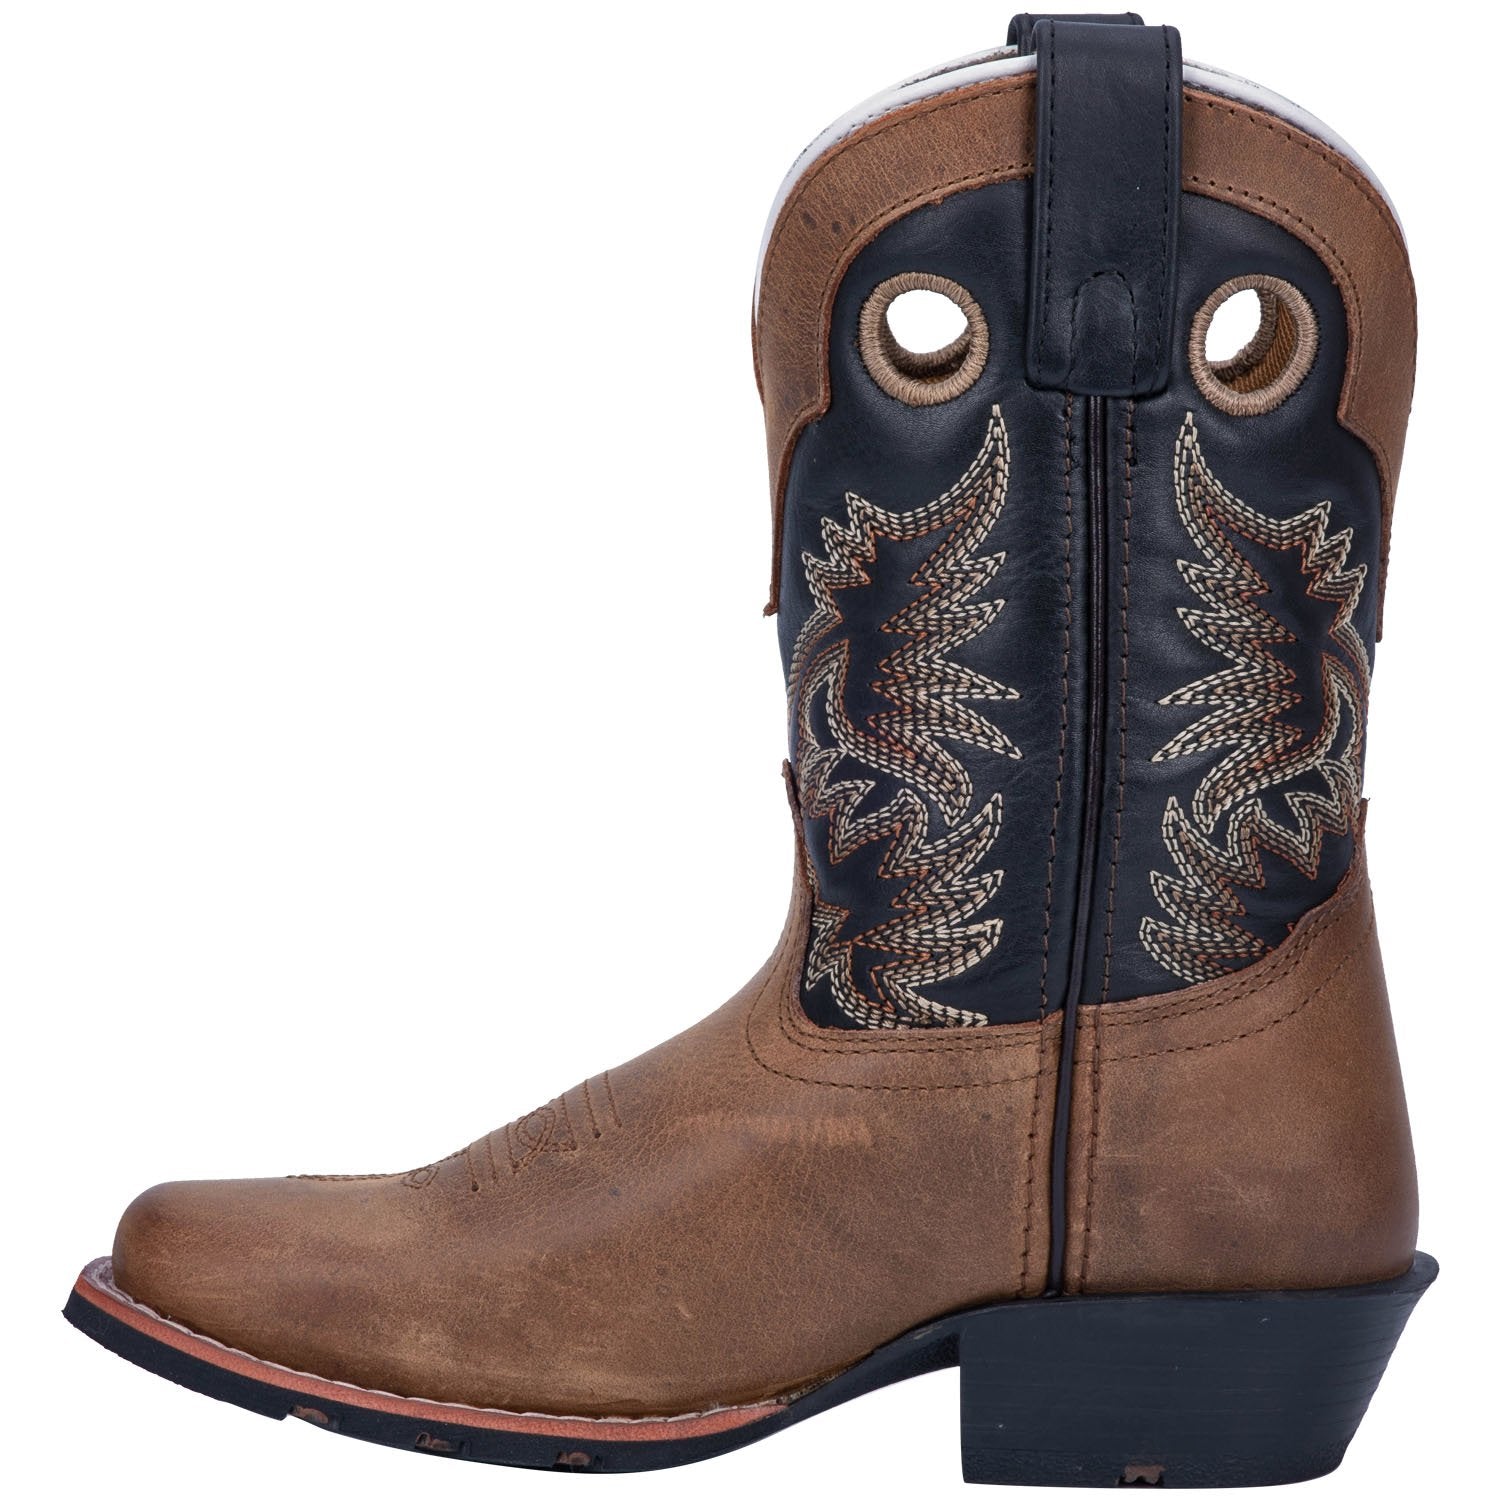 RASCAL LEATHER CHILDREN'S BOOT